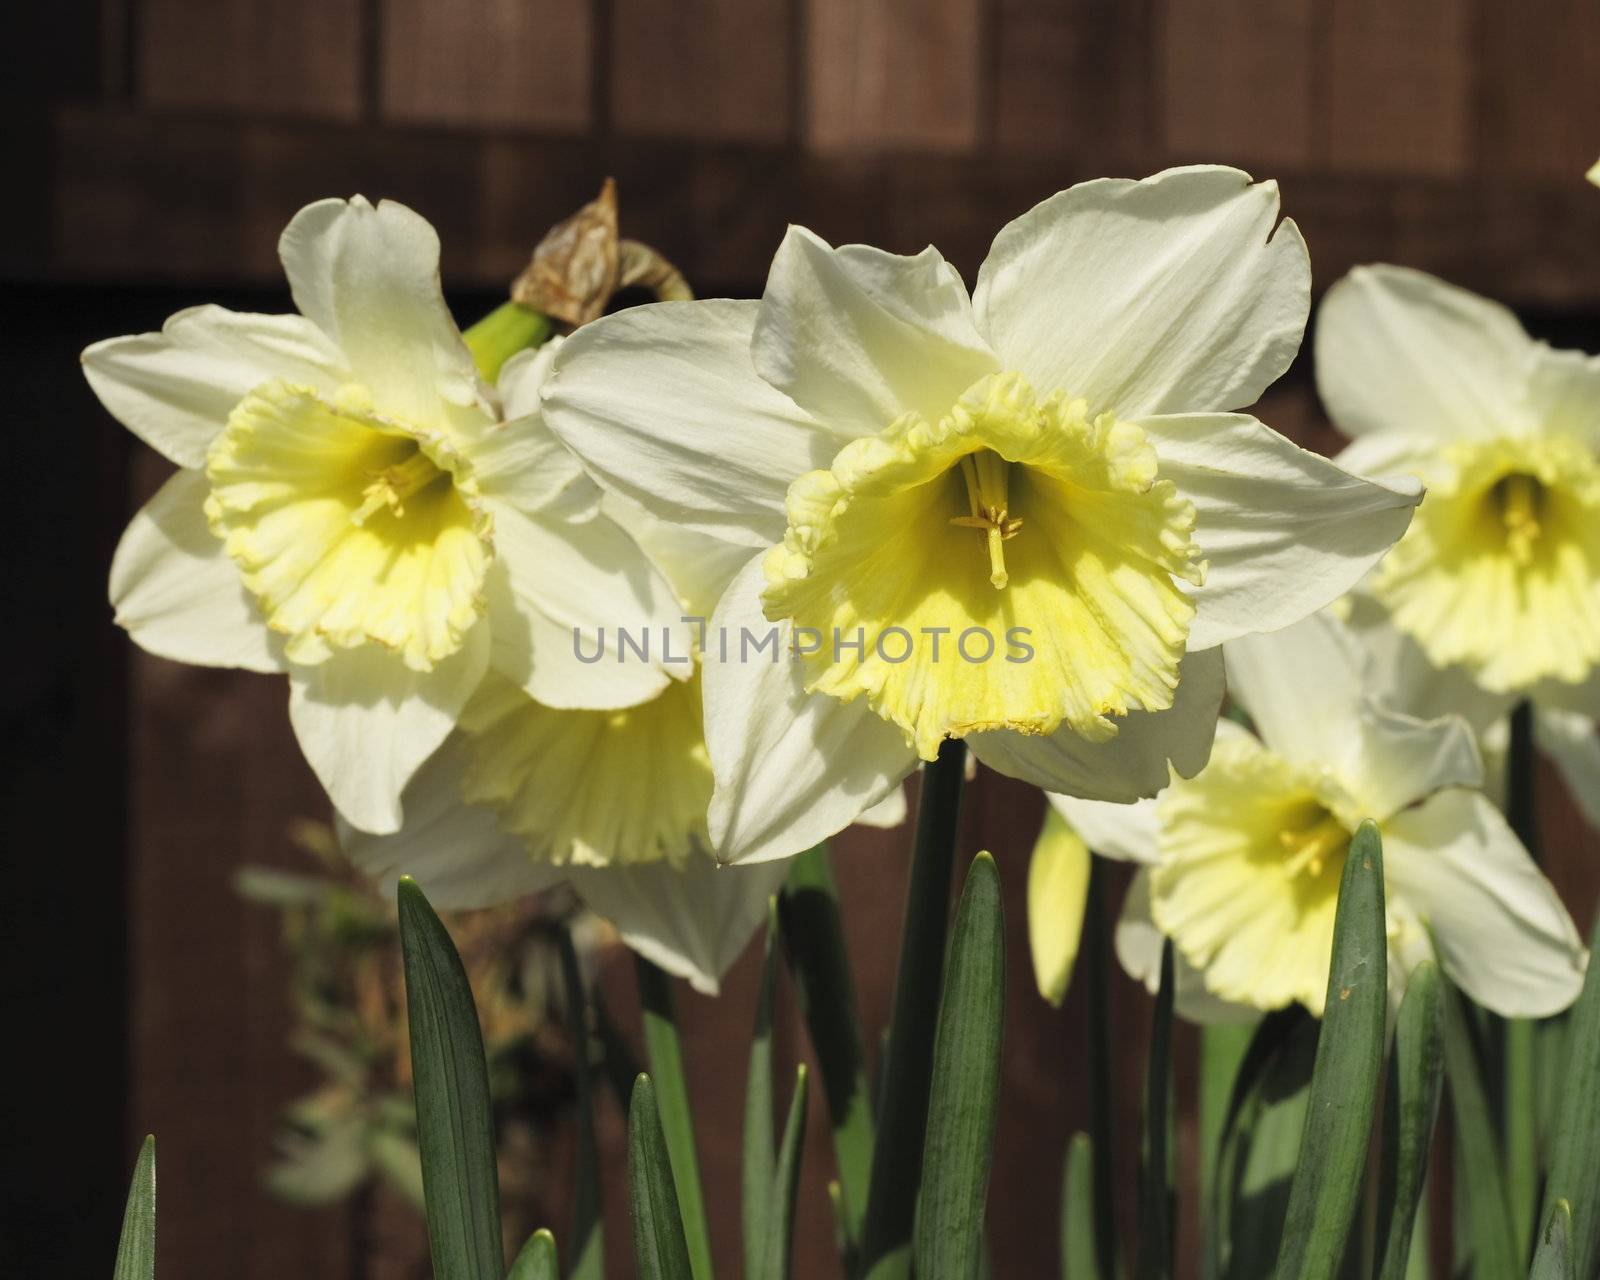 daffodils in the sunlight by leafy